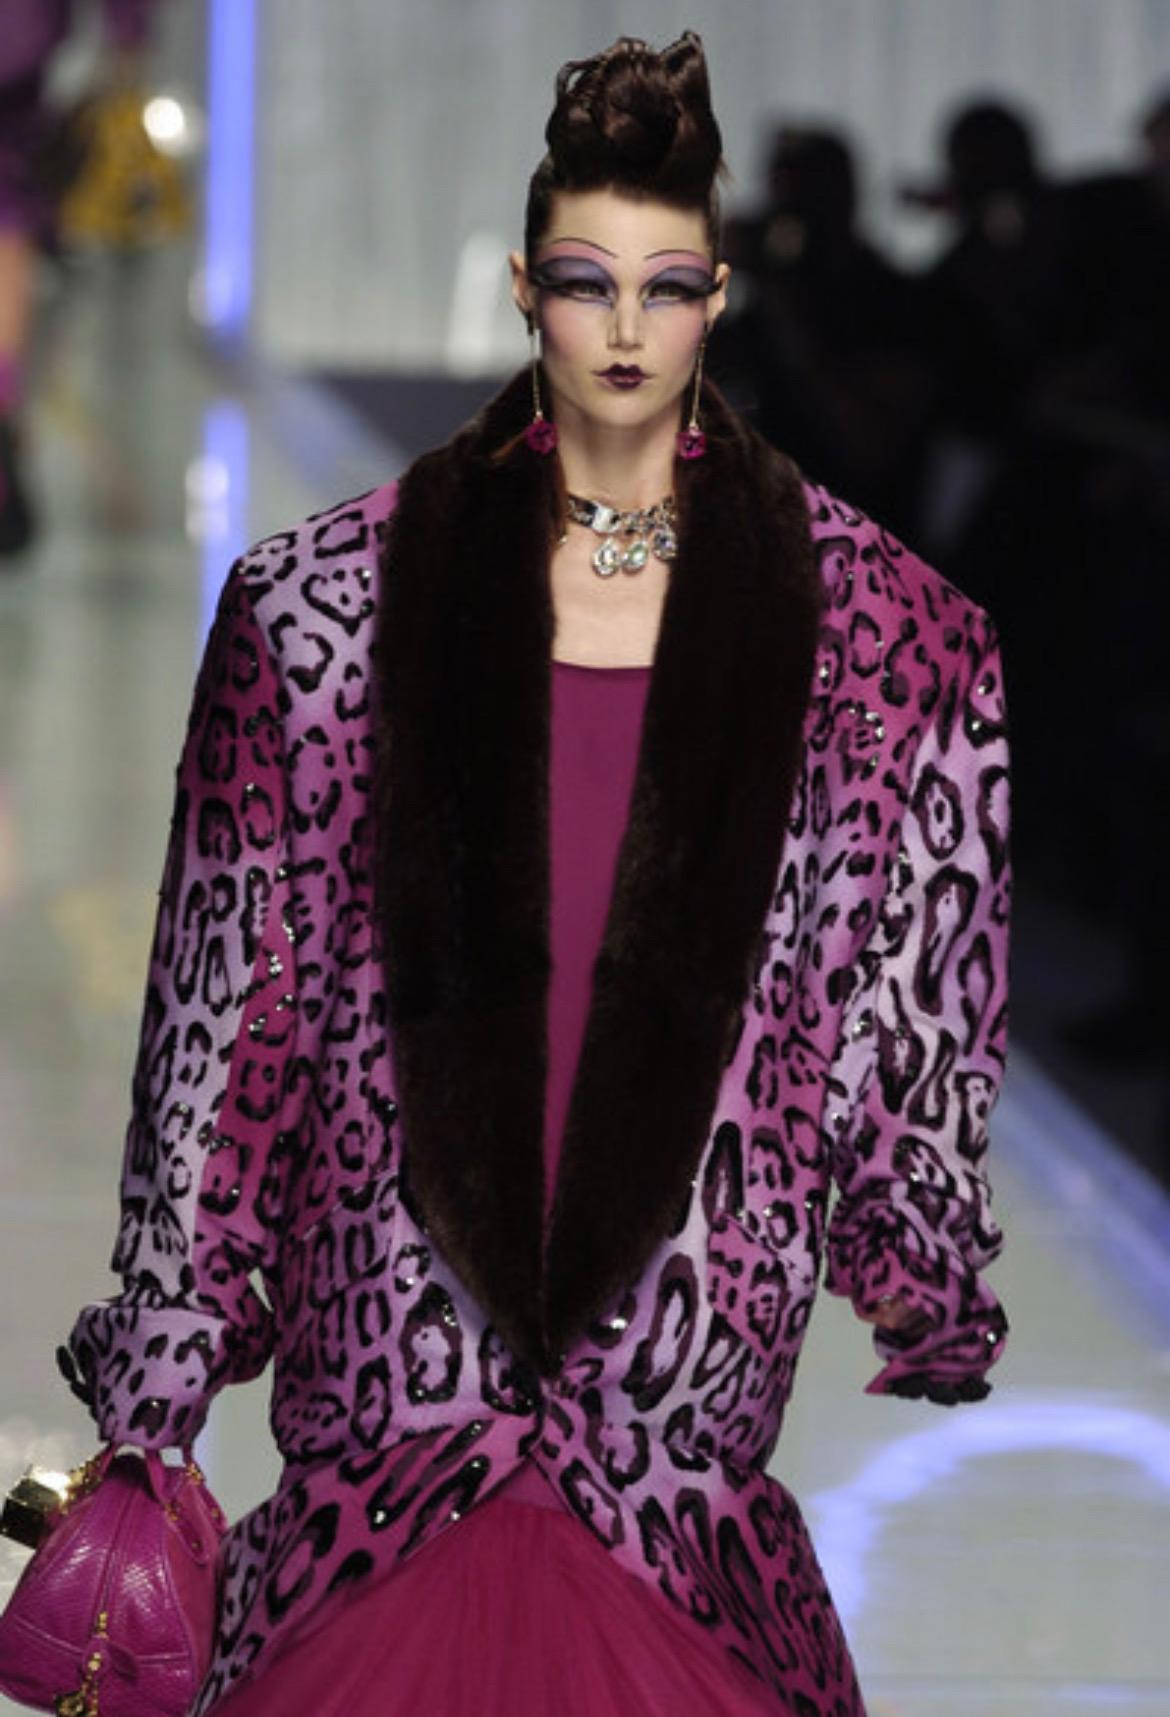 TheRealList presents: a purple cheetah print Christian Dior robe, designed by John Galliano. From the Fall/Winter 2004 'gambler' collection, this robe boasts a cheetah print that was heavily used in the collection and appeared in several runway